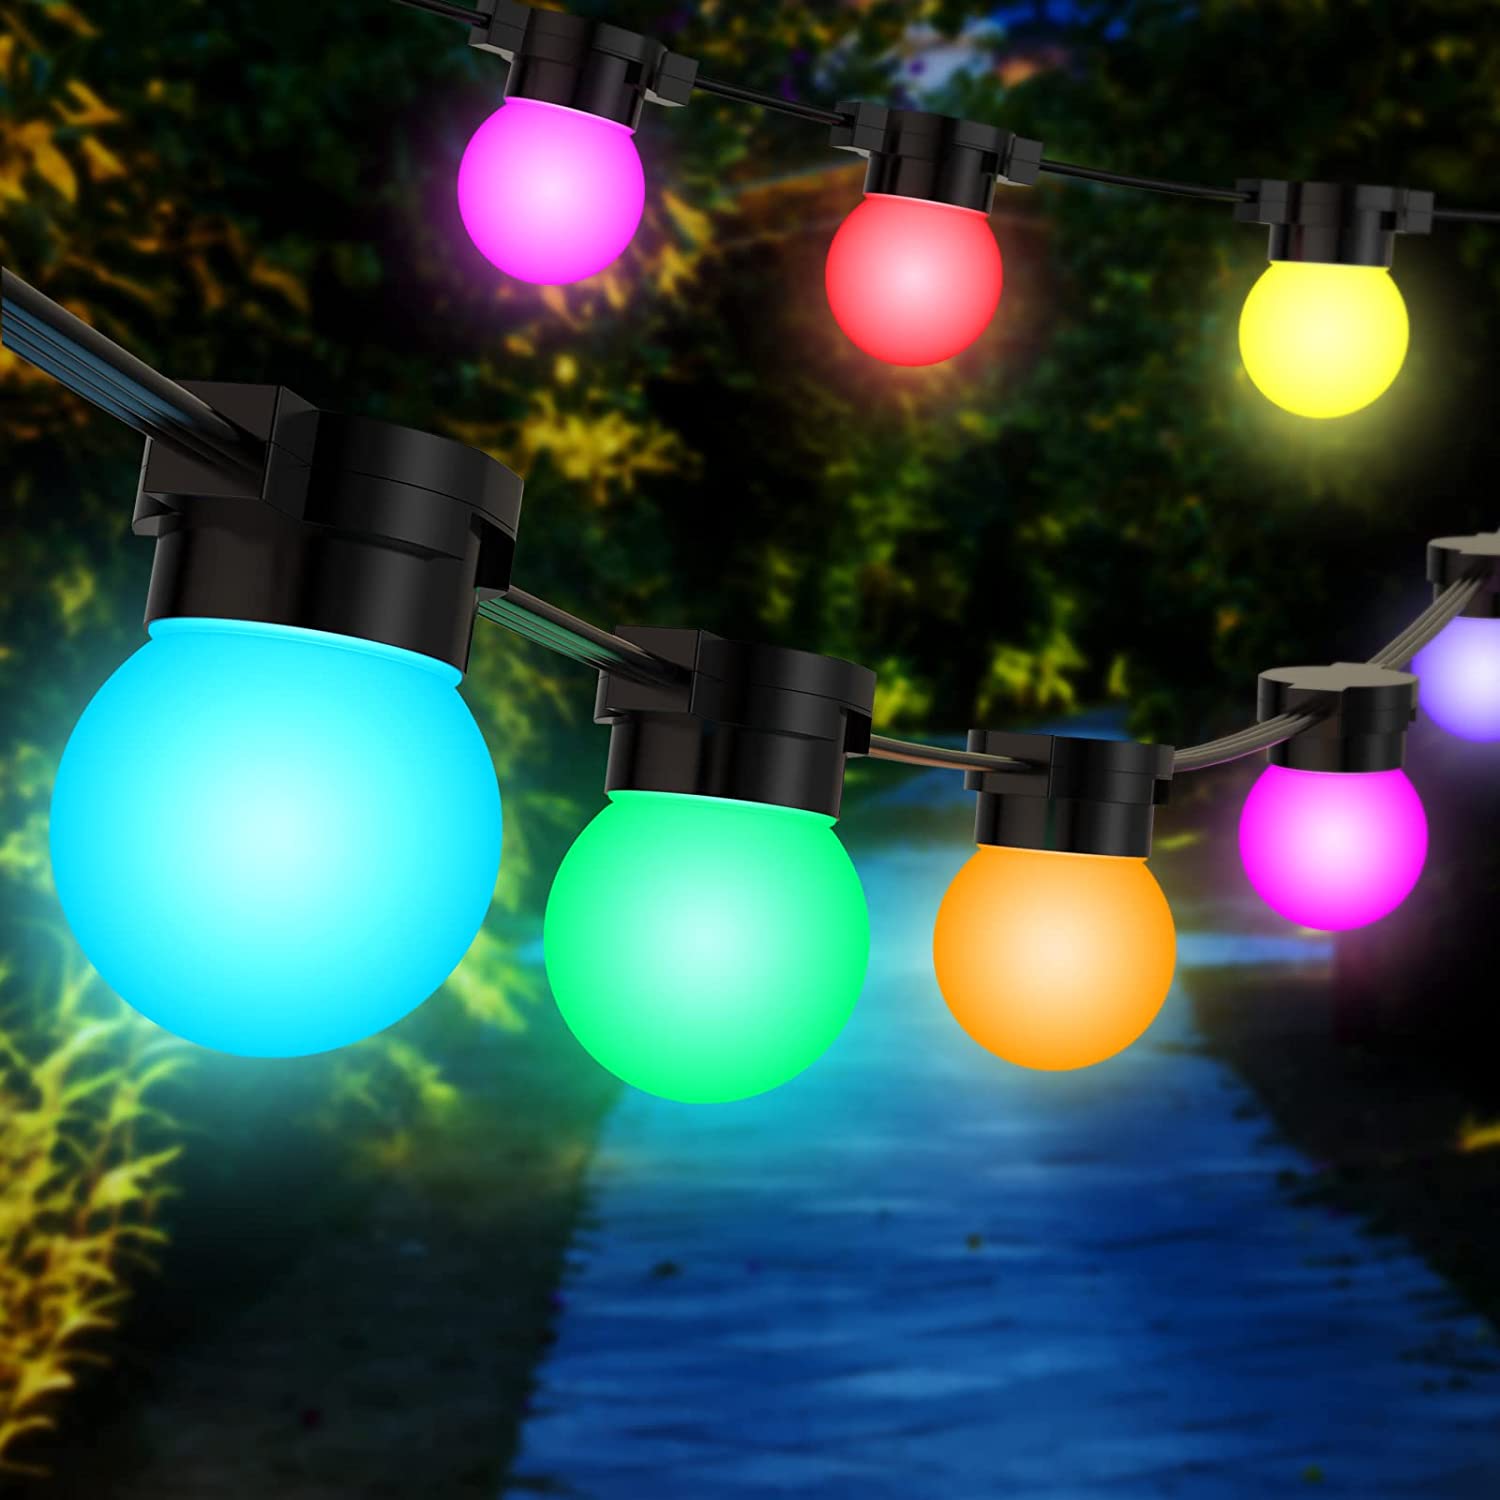 10+3 Meters Festoon Lights Outdoor, Hanging or Affixing 13 meters 20 Bulbs String Lights with IR remote, Plug & Play Power Supply, Shatterproof Fairy Lights for Gazebo Garden Party Wedding Café Decor (Multicolour)